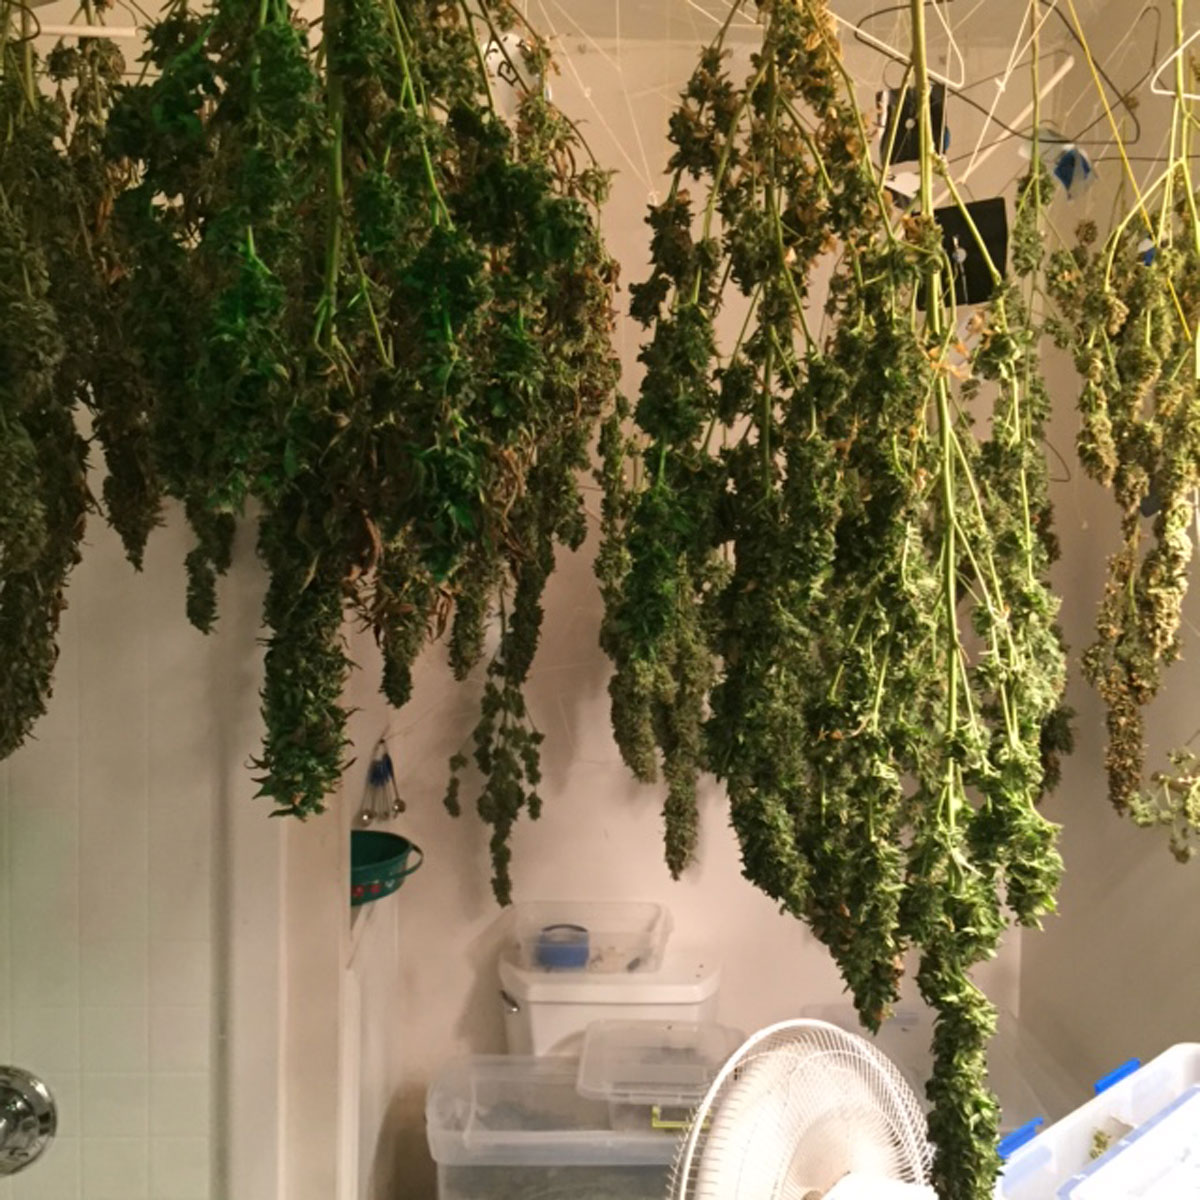 The confiscated marijuana has an estimated street value of $159,880.  (Courtesy Anne Arundel County Police Department) 